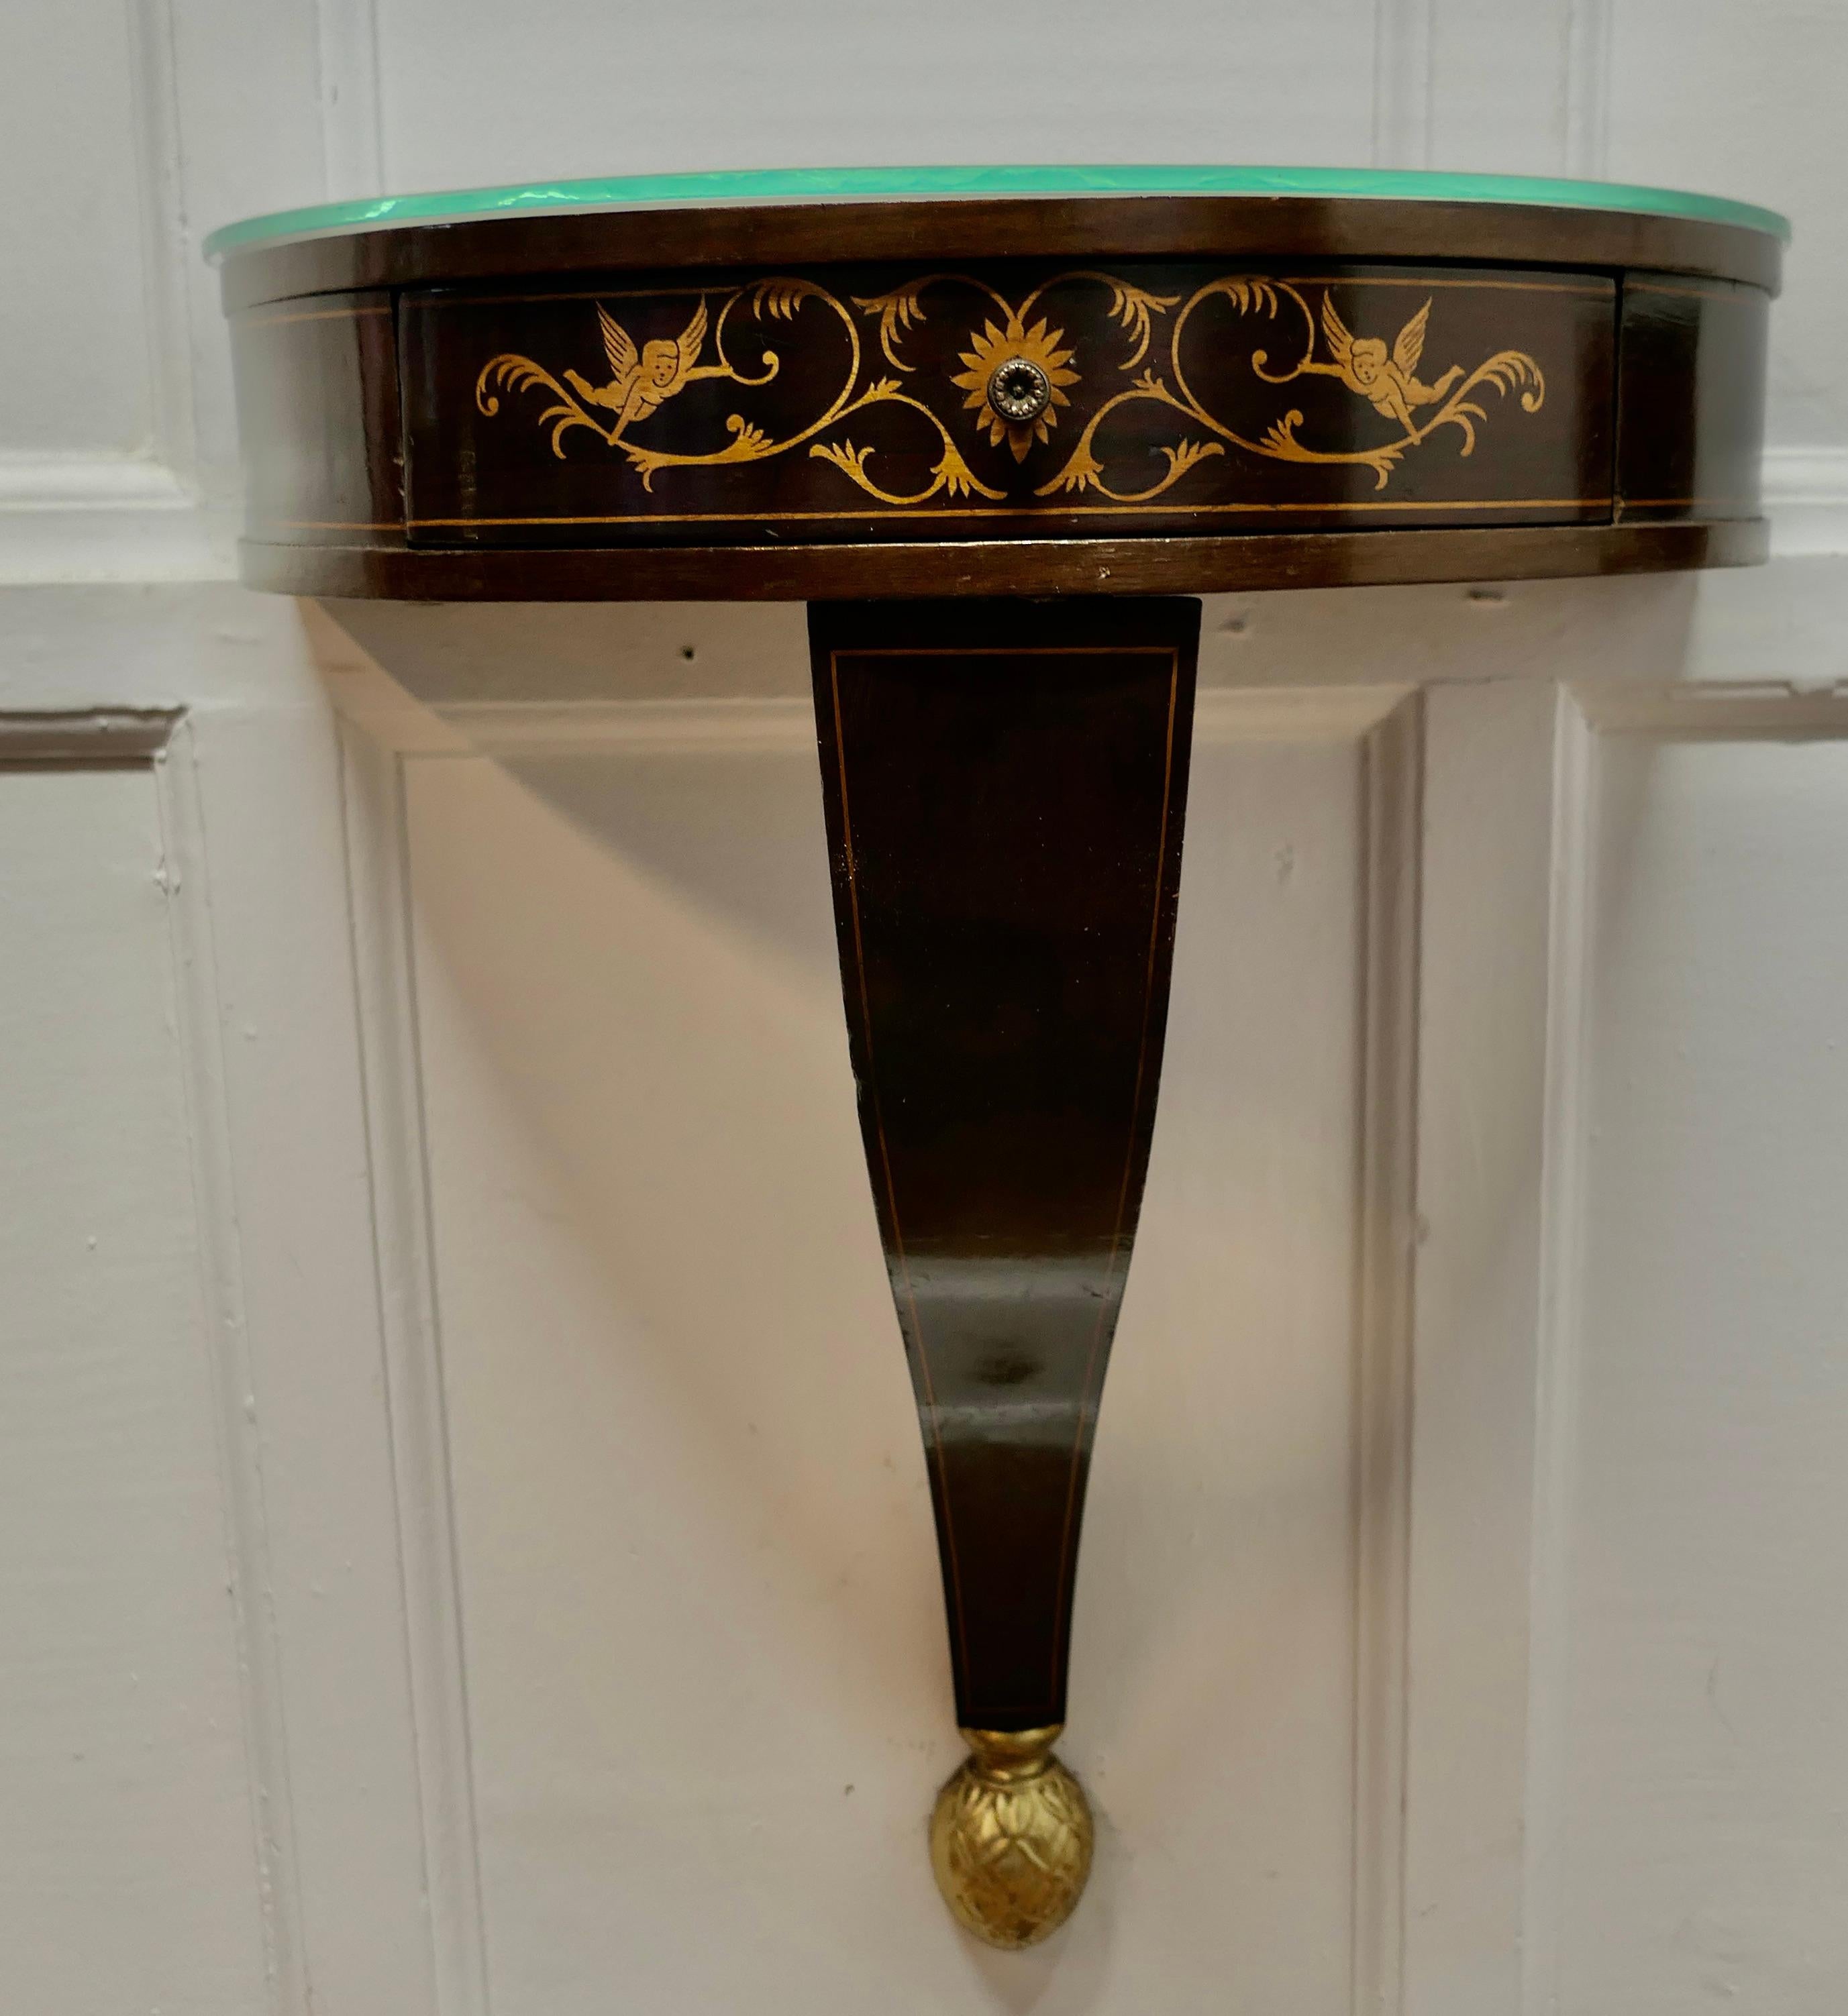 A Pair of Regency Style Console Wall Table Brackets

Two beautifully designed little console tables, the decoration is in the regency style with angels and acanthus leaves
The shelves have a Demi Lune shape, a drawer to the front and a shaped leg